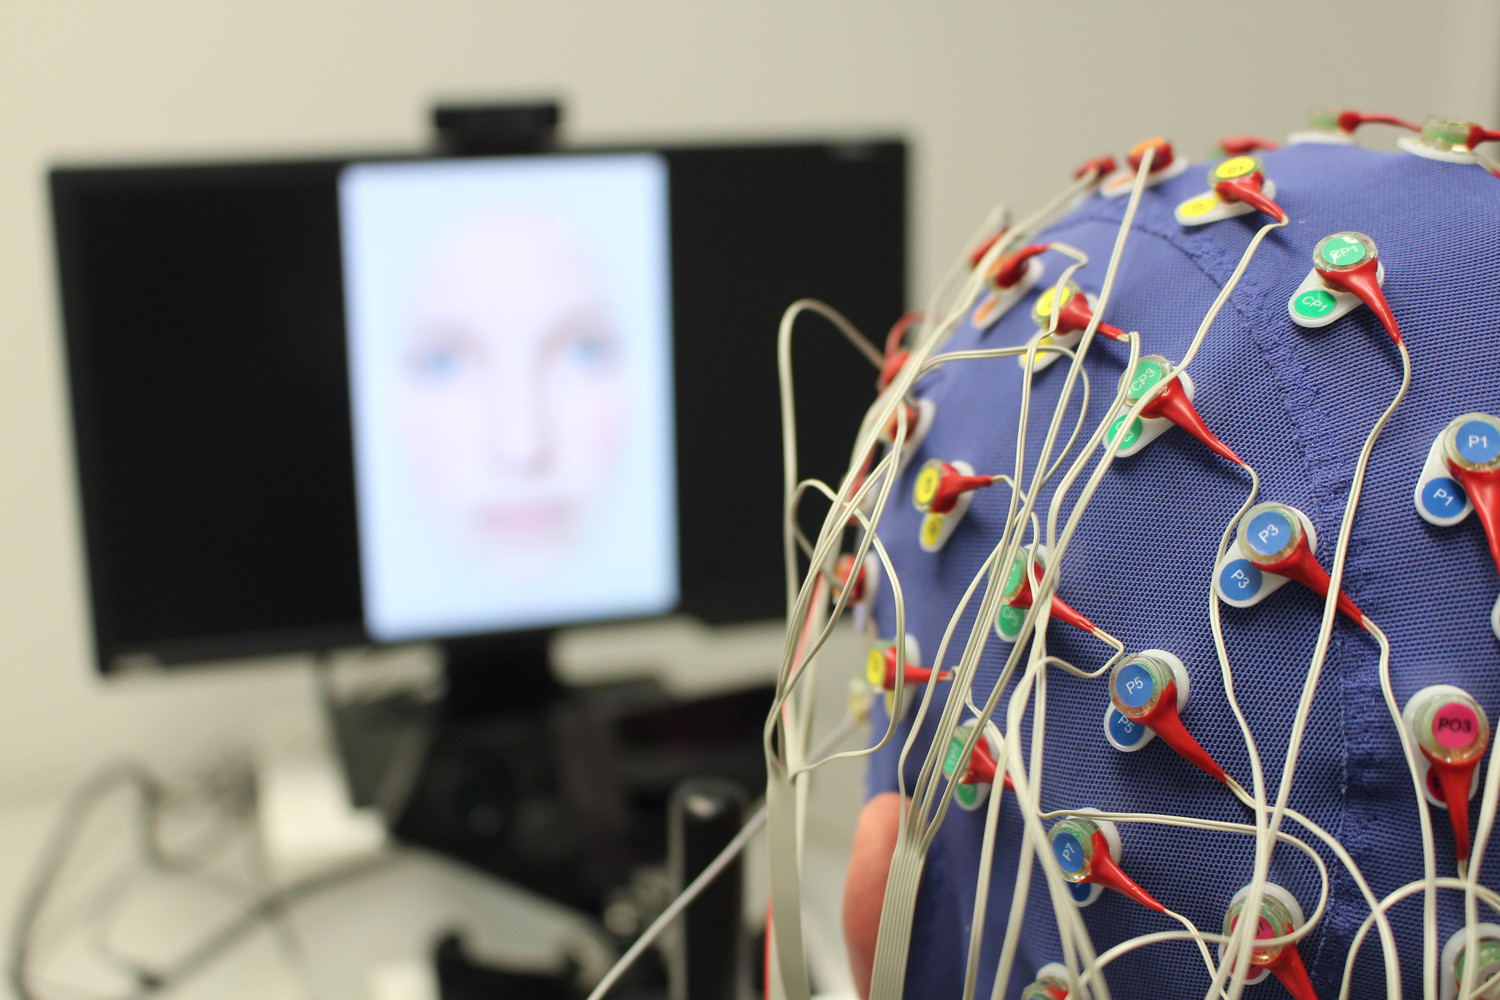 participant during EEG testing